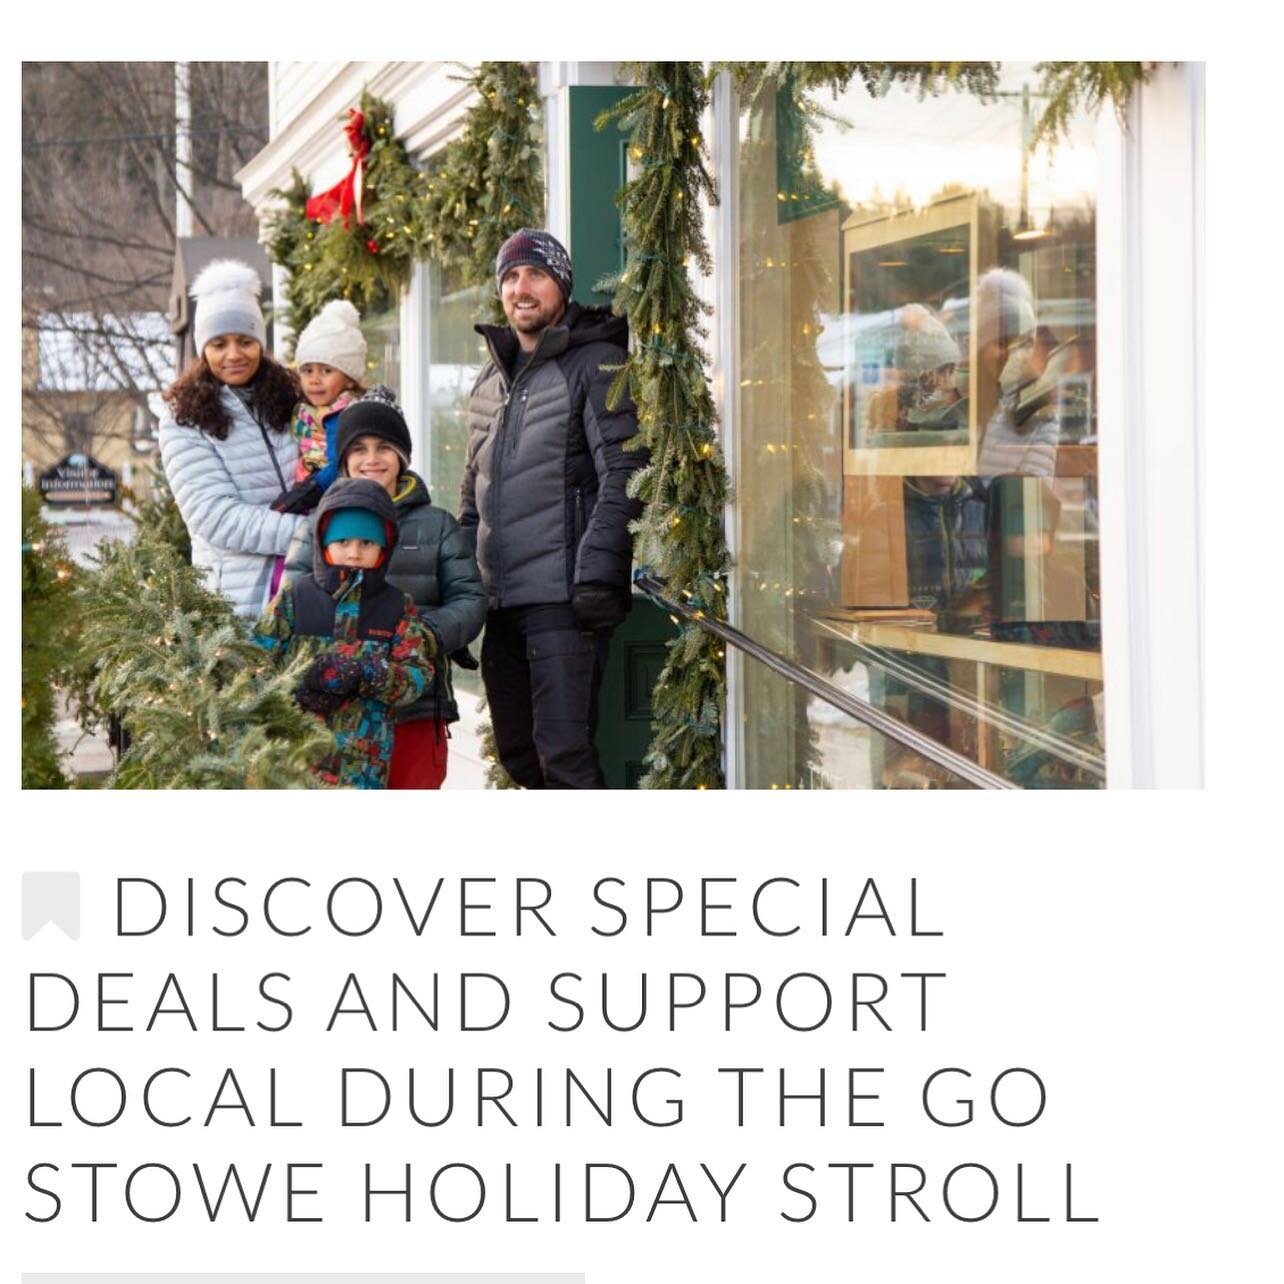 Stowe&rsquo;s Holiday Stroll starts today! Now, through Wednesday, bring in 3 or more non-perishables and receive 20% off one full-priced item. Items collected will be donated to the @lcfoodshare 🍱. And, did someone say that you could win things too